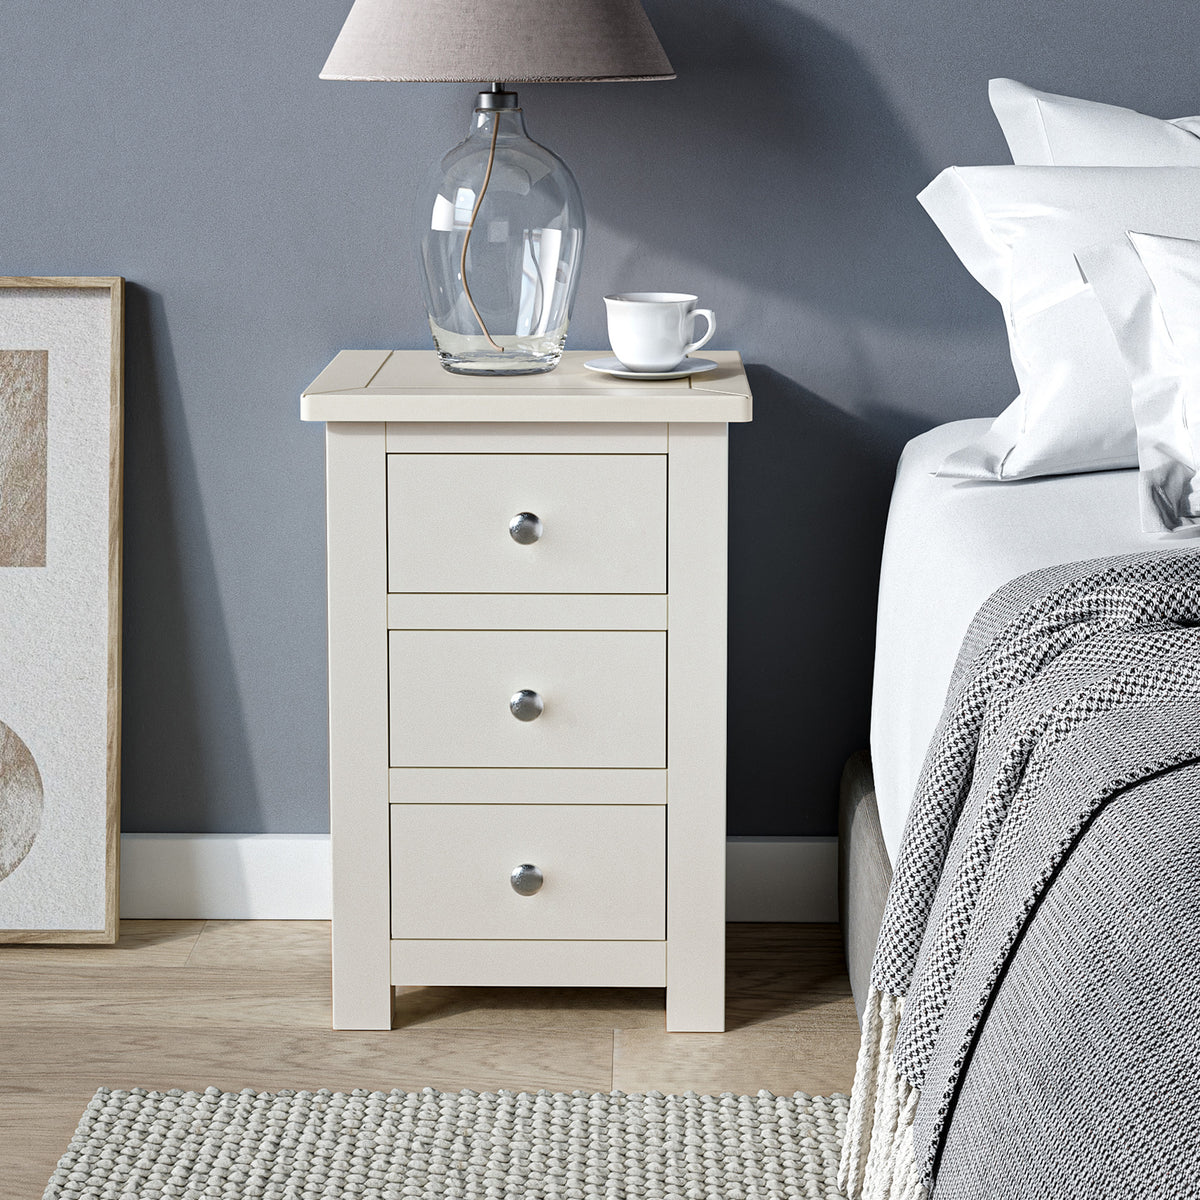 Duchy Linen Cream 3 Drawer Bedside Table for bedroom